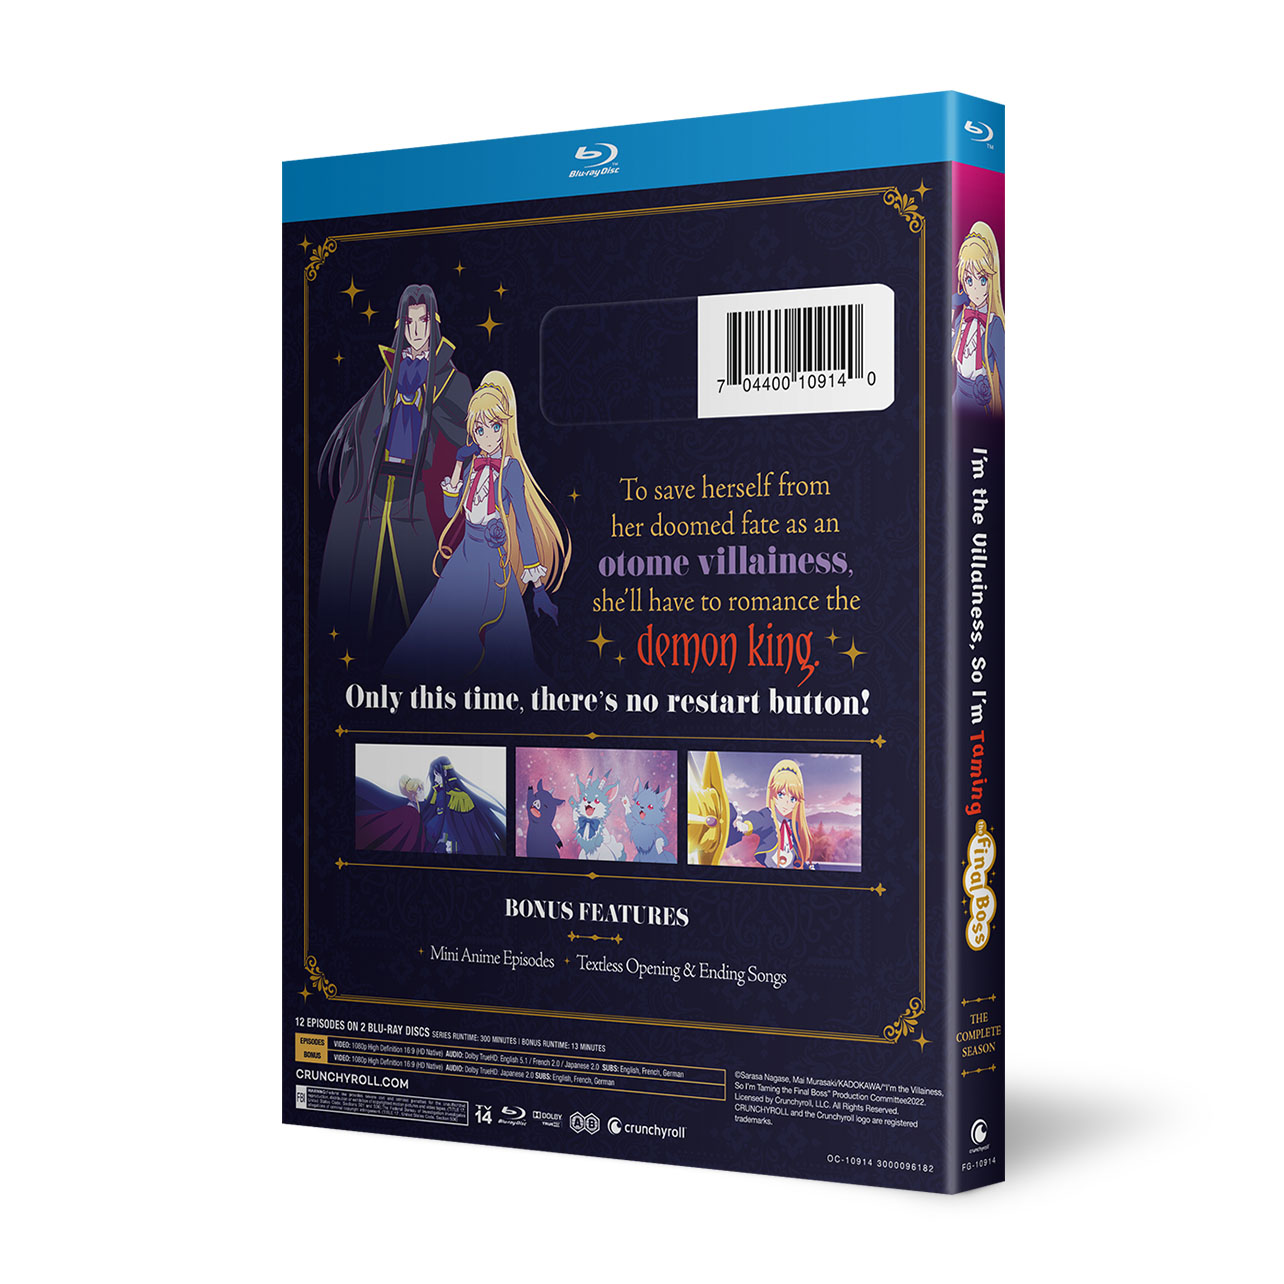 I'm the Villainess, So I'm Taming the Final Boss Vol 1-12 End Anime Dvd  English